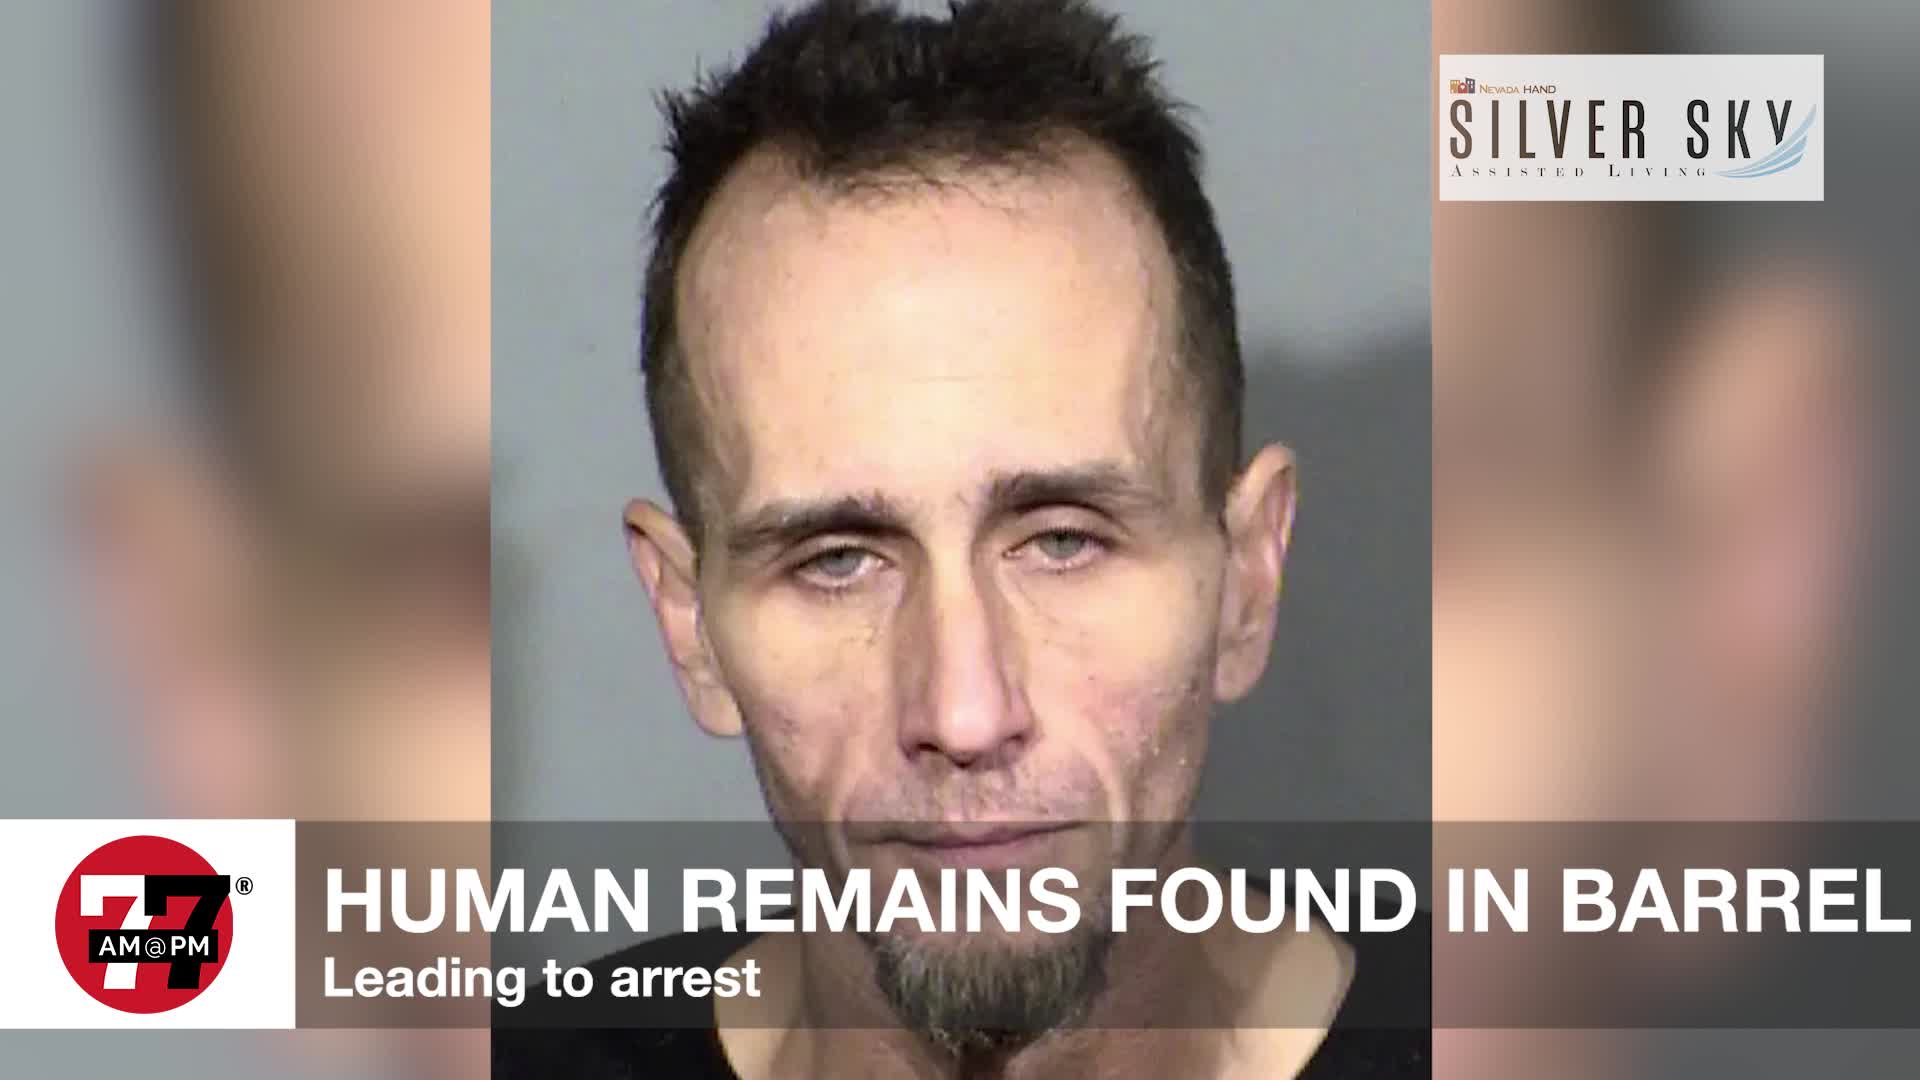 Suspect Arrested in connection to human remains found